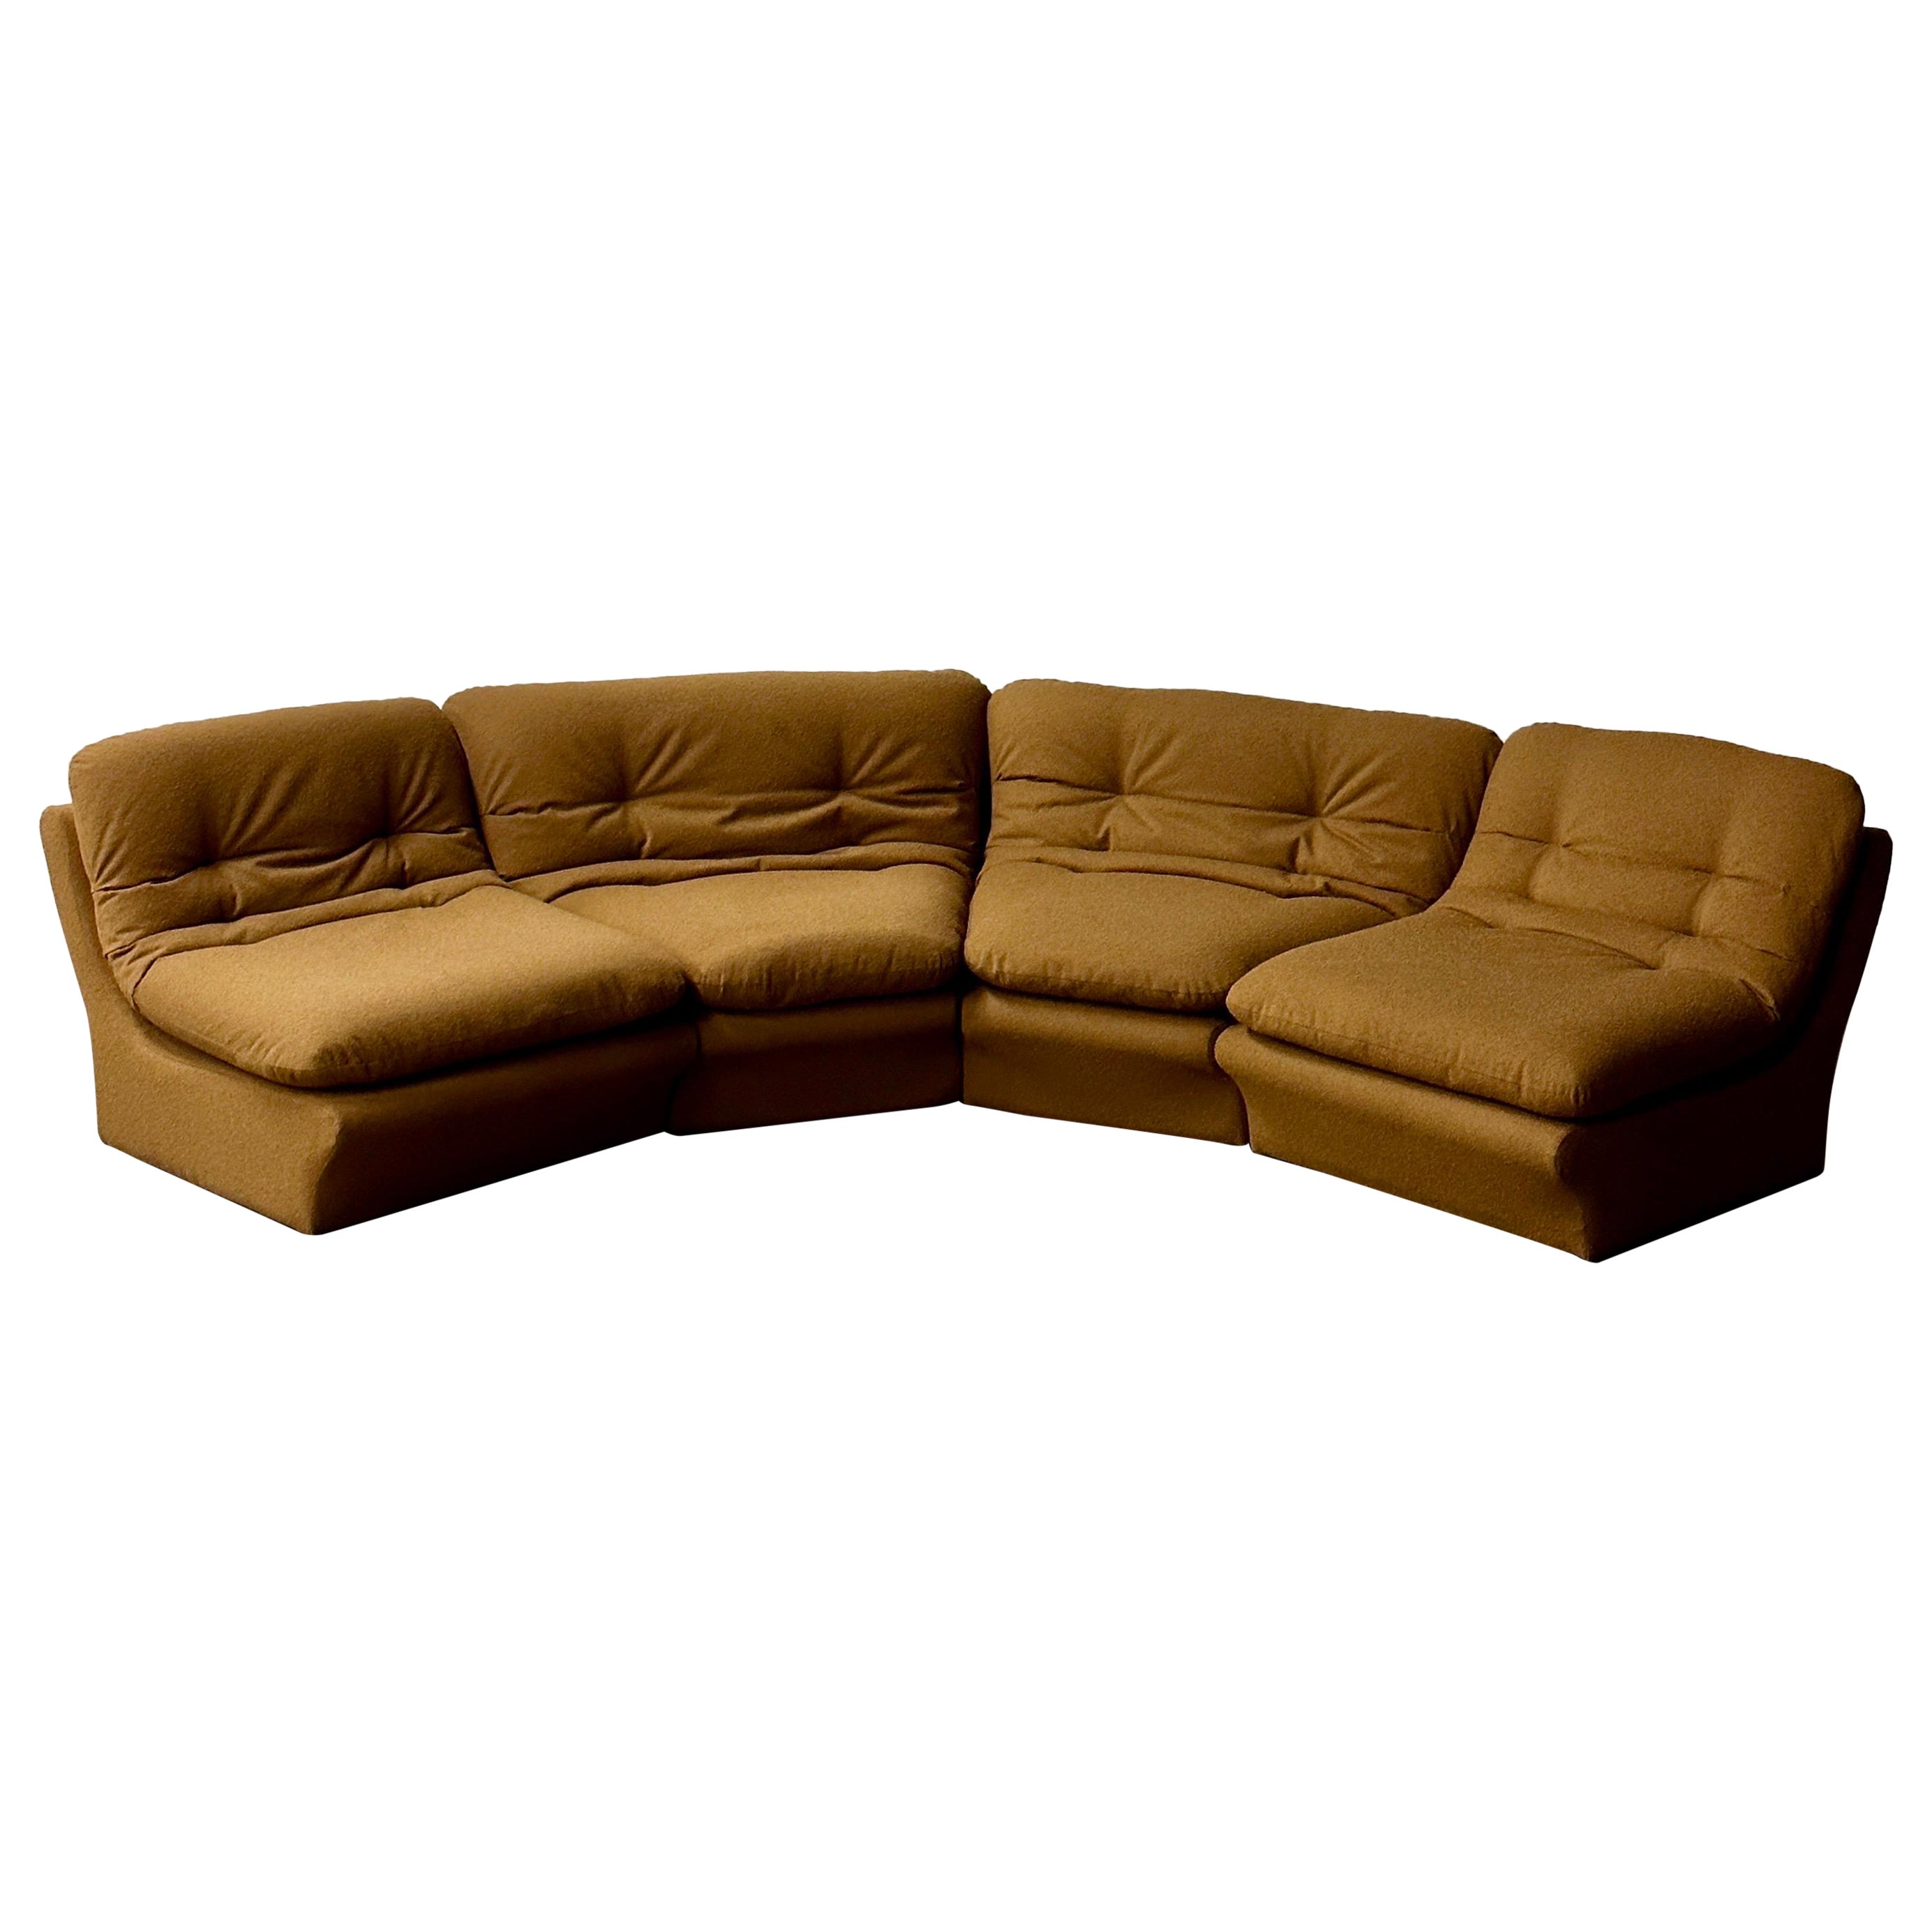 Modular Postmodern Sectional Attributed to Vladimir Kagan for Preview